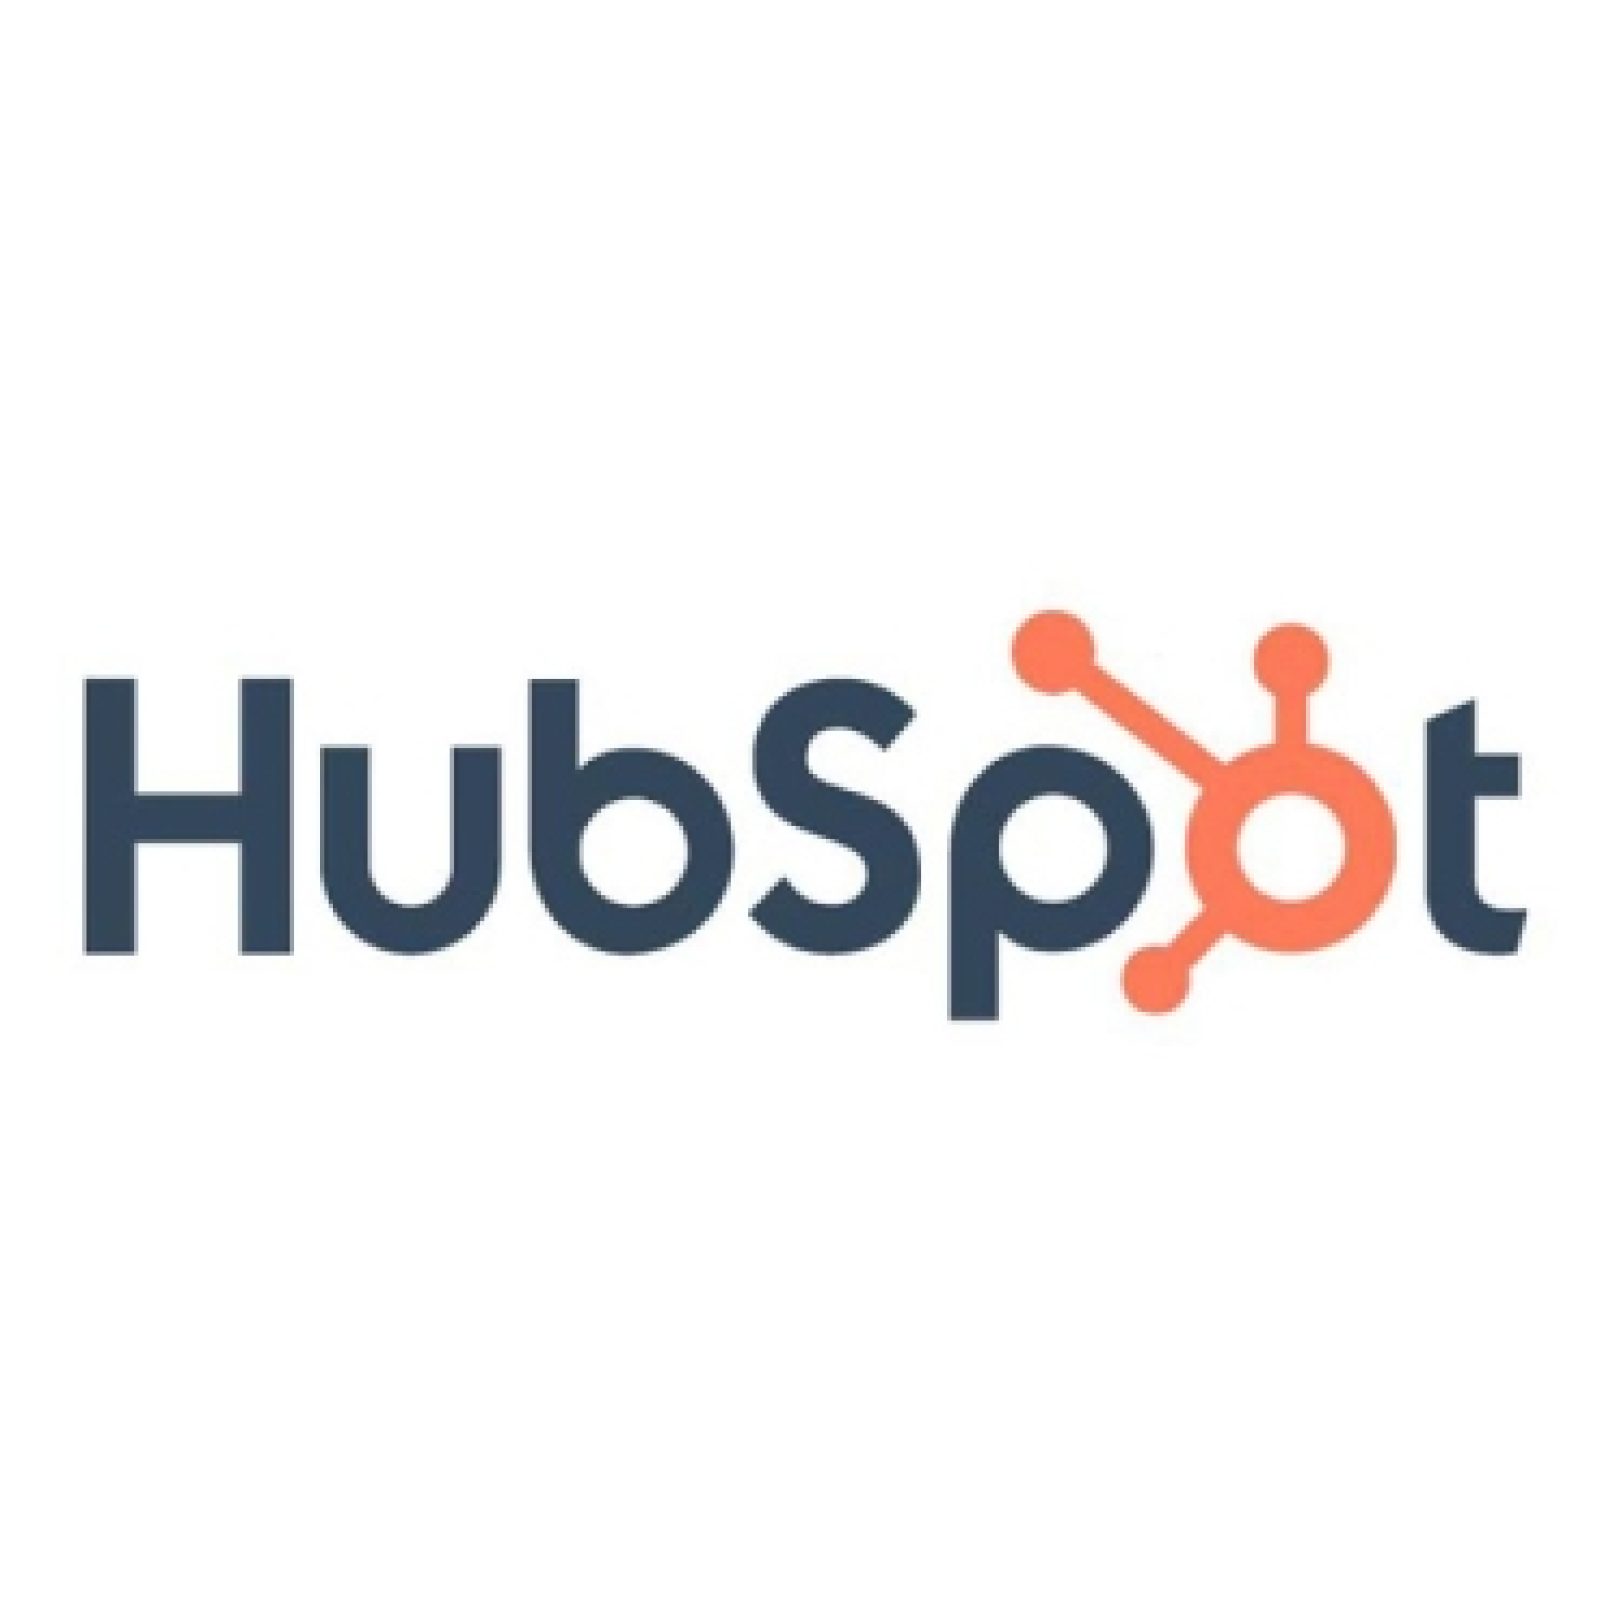 Hubspot can help you in the growth of your business